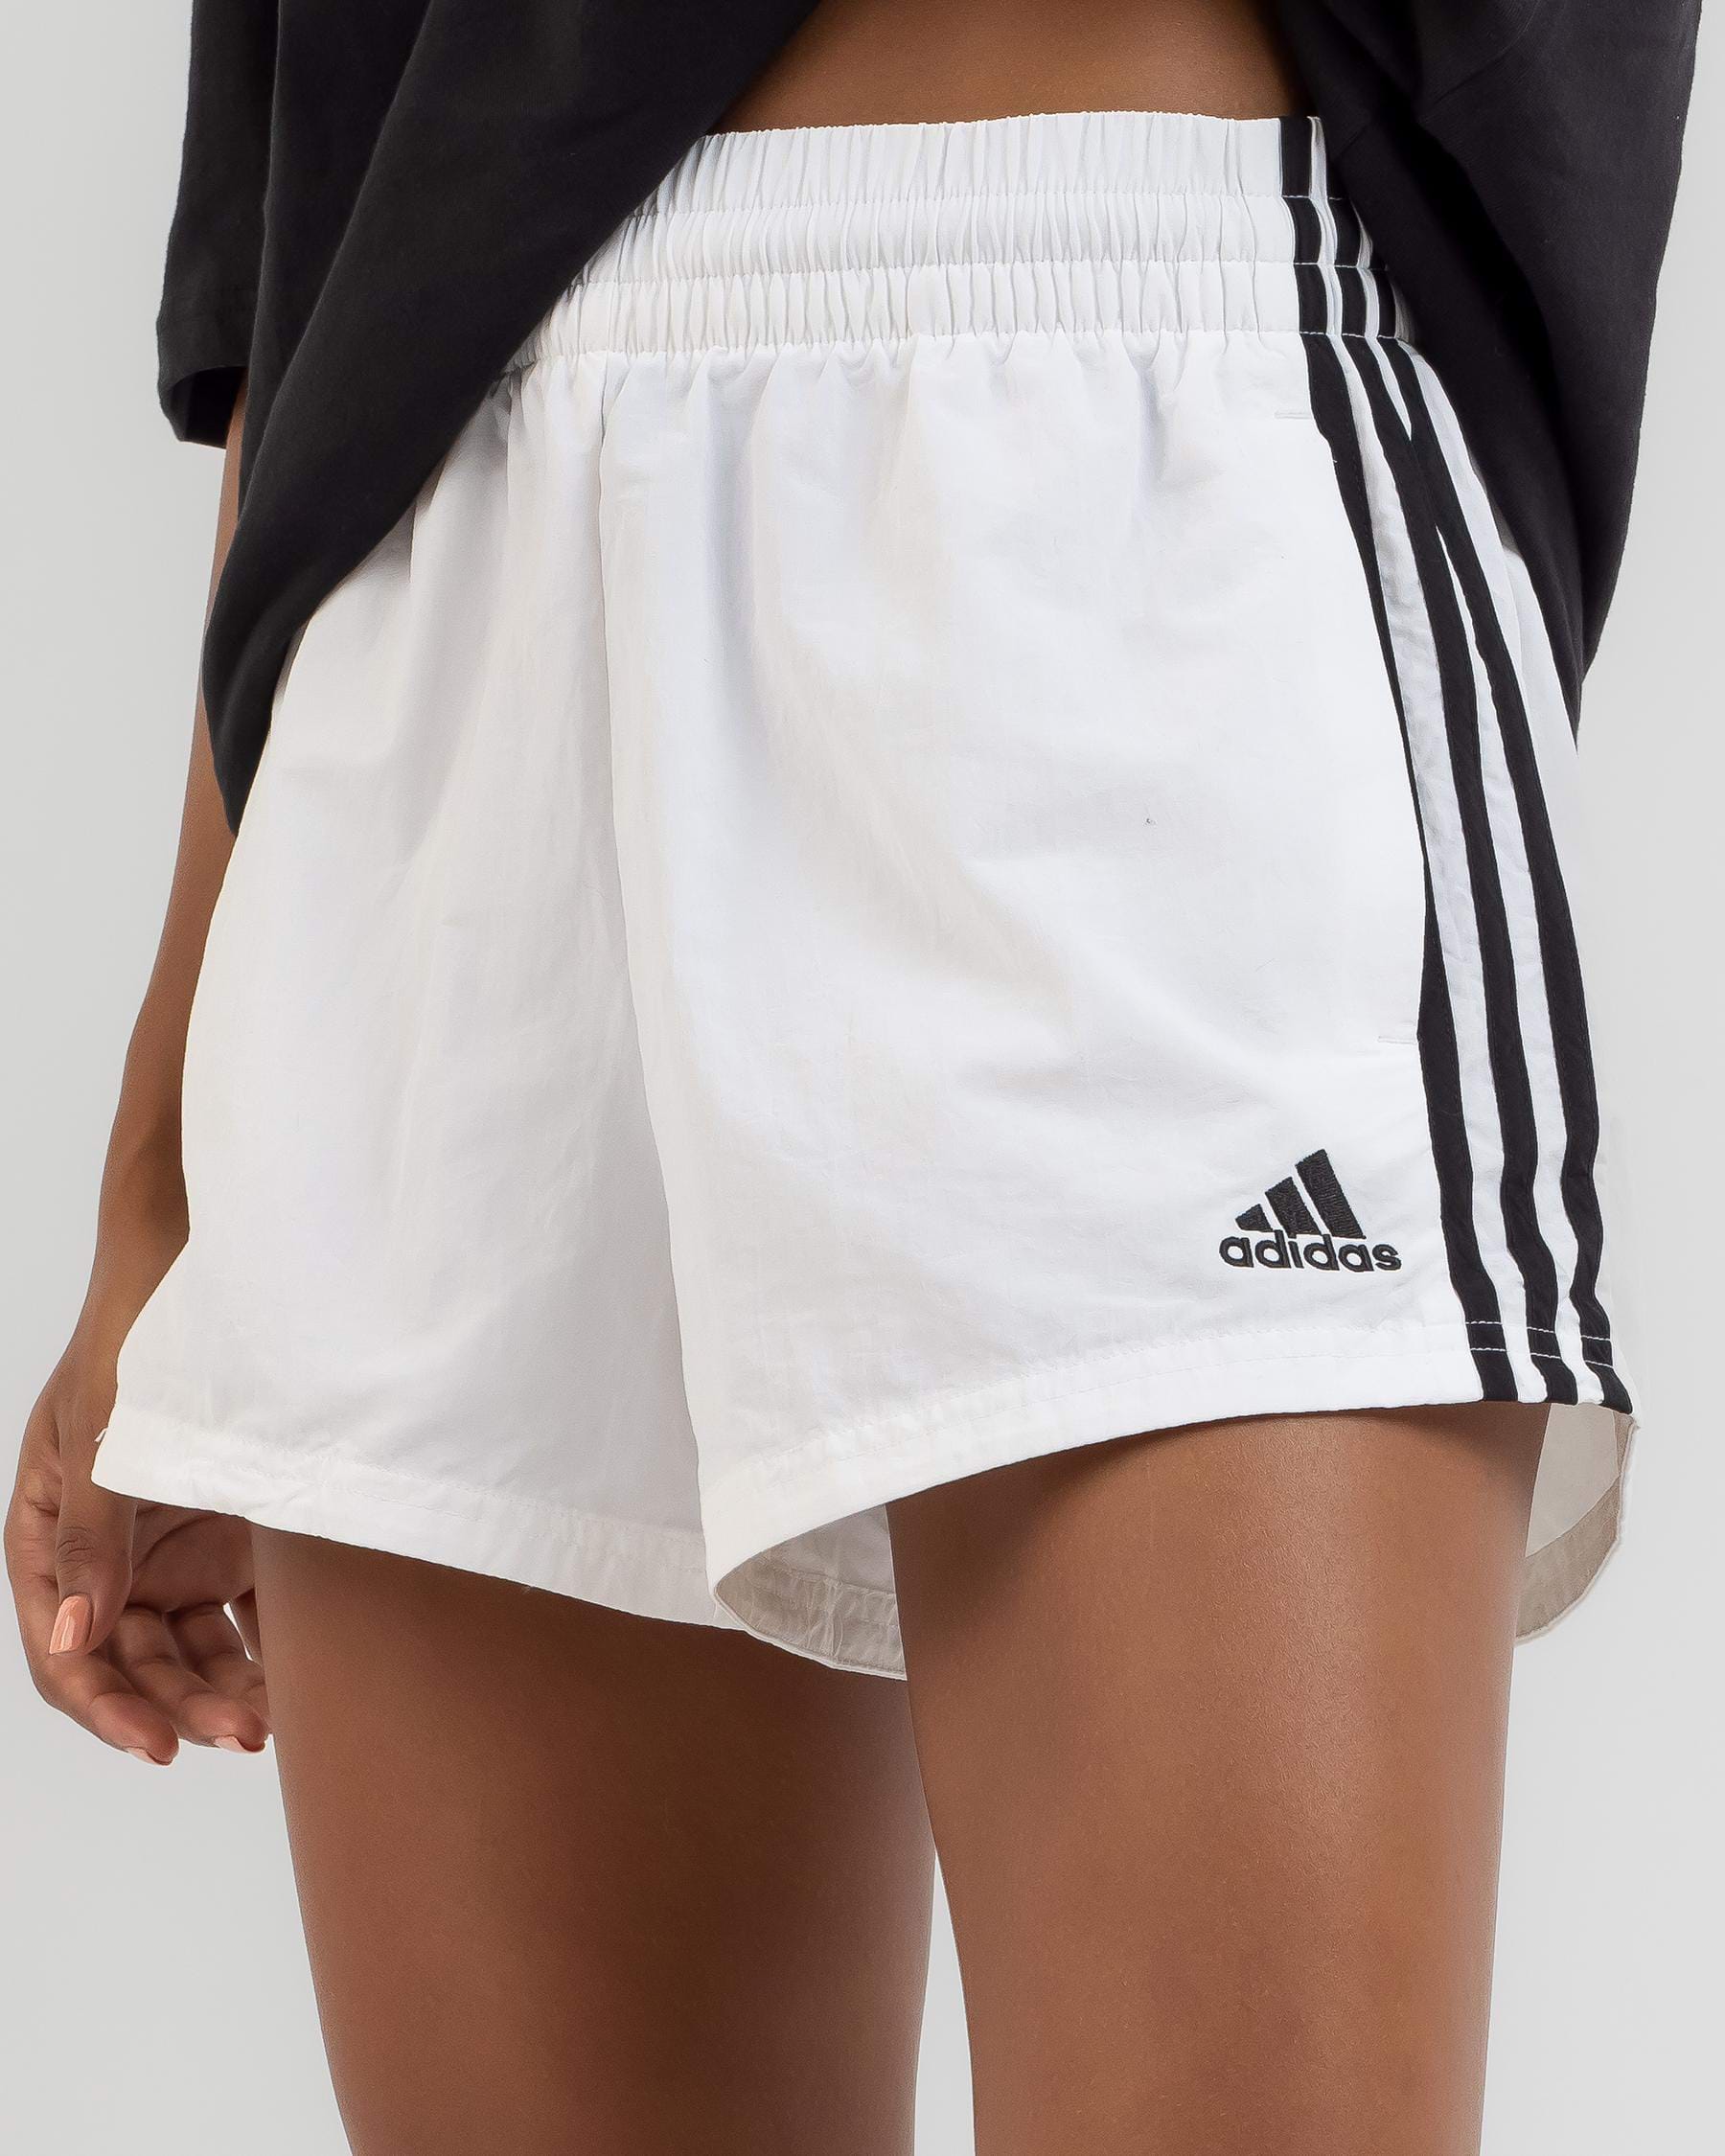 Adidas Essentials 3 Stripe Woven Shorts In White/black - FREE* Shipping &  Easy Returns - City Beach United States